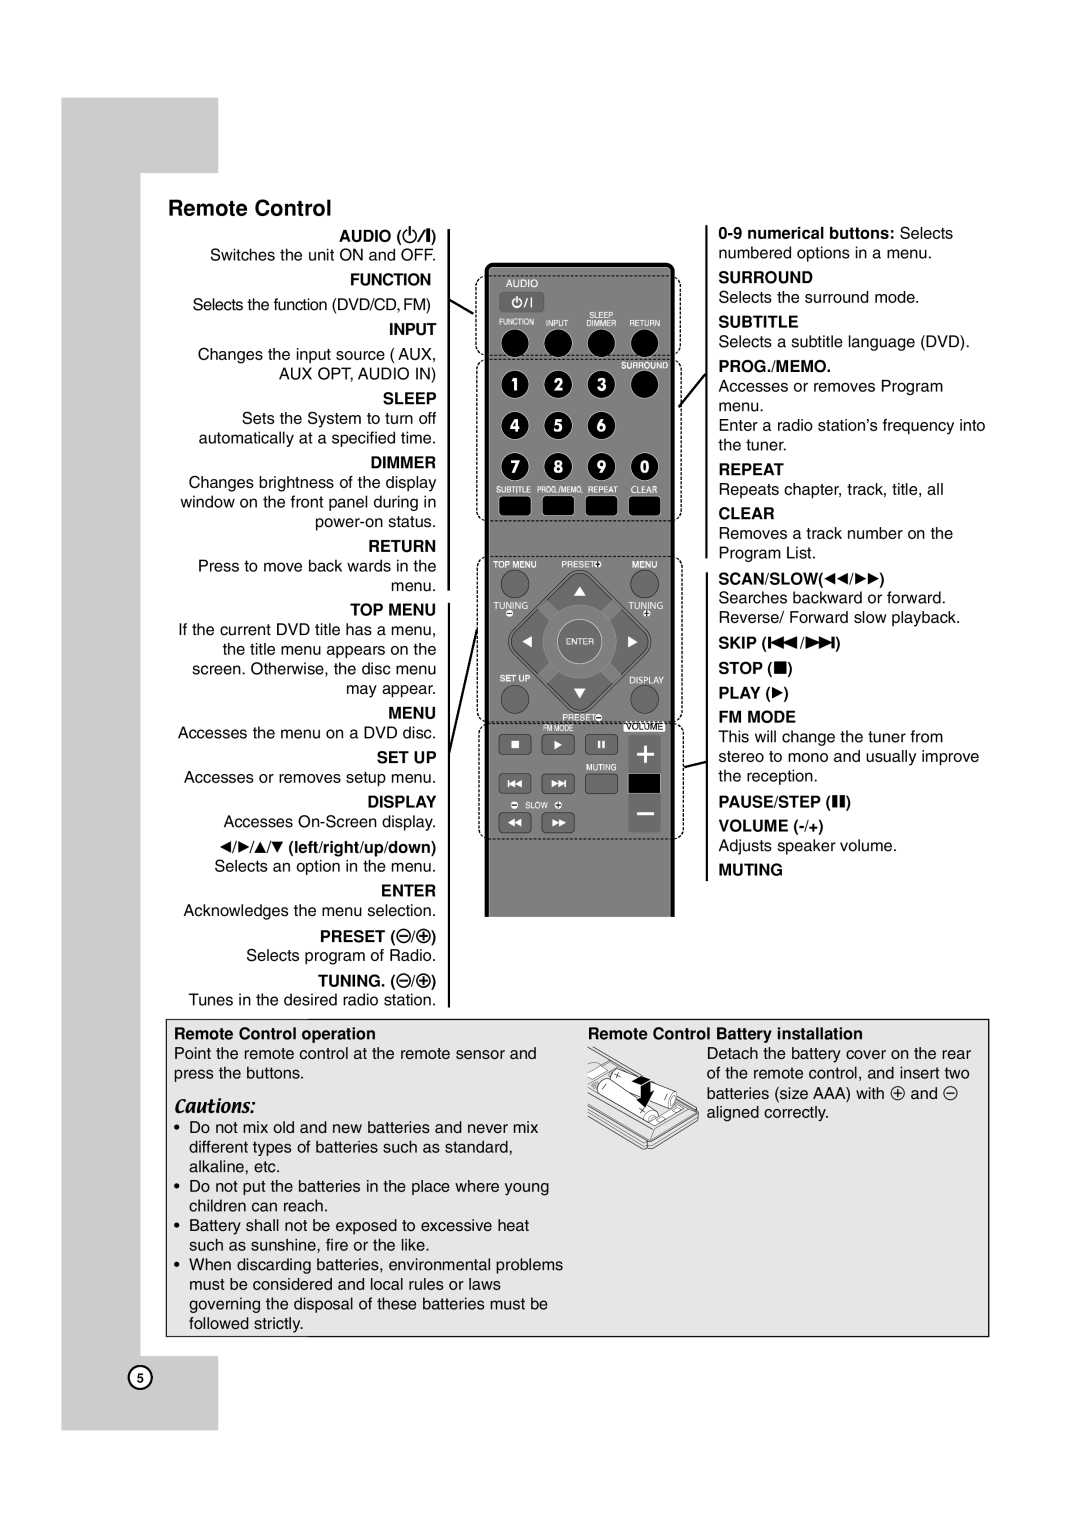 JVC TH-G40 Remote Control, Audio, numerical buttons Selects, Function, Surround, Subtitle, Input, Prog./Memo, Sleep, Clear 